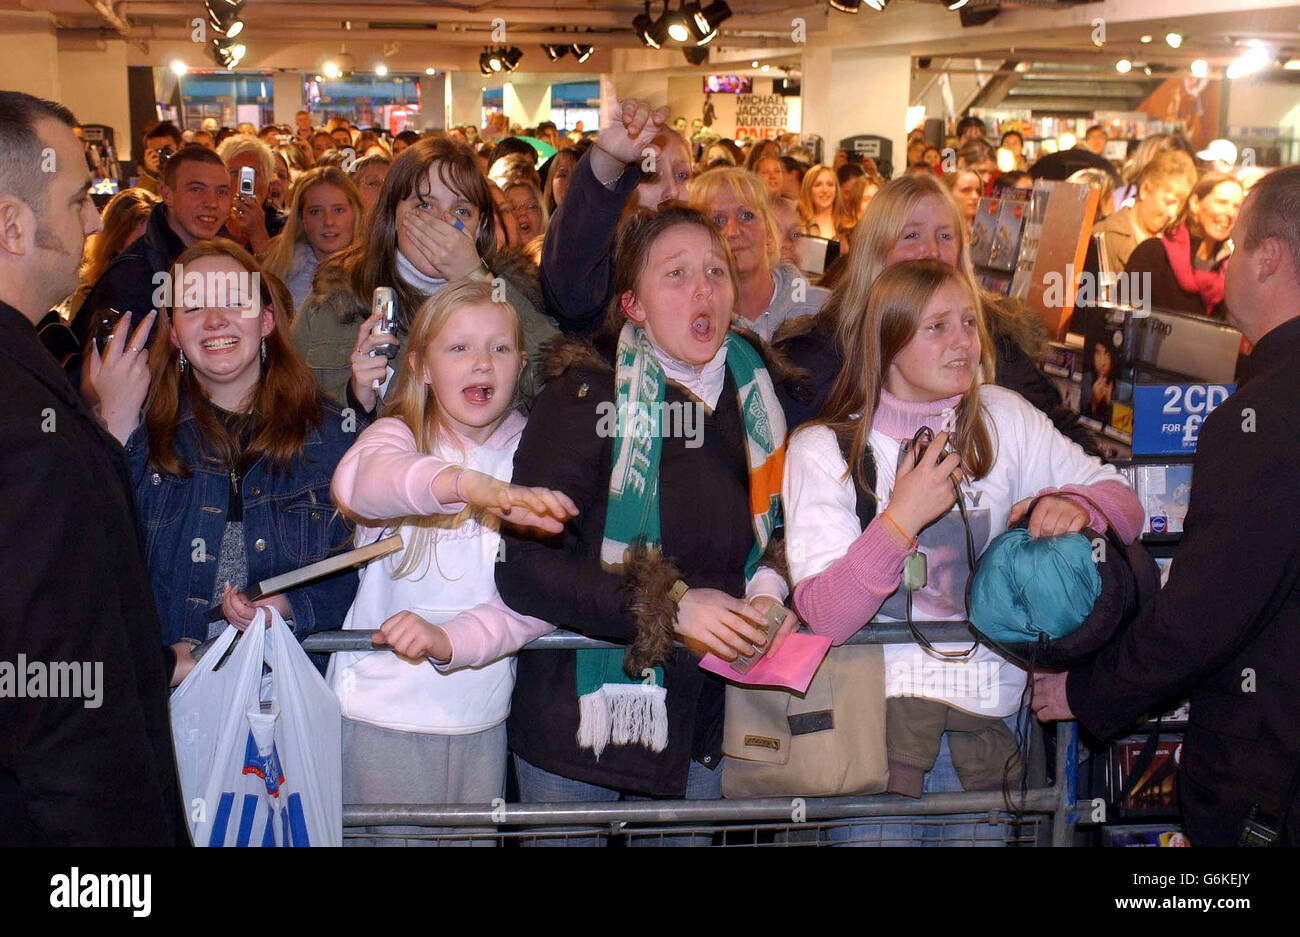 Fans of Westlife scream and cheers as the boyband appear during a photocall and record signing to launch their new single 'Mandy', which is released today, at HMV Trocadero, Piccadilly Circus, central London. Mandy was originally a hit for Barry Manilow back in 1975. Stock Photo